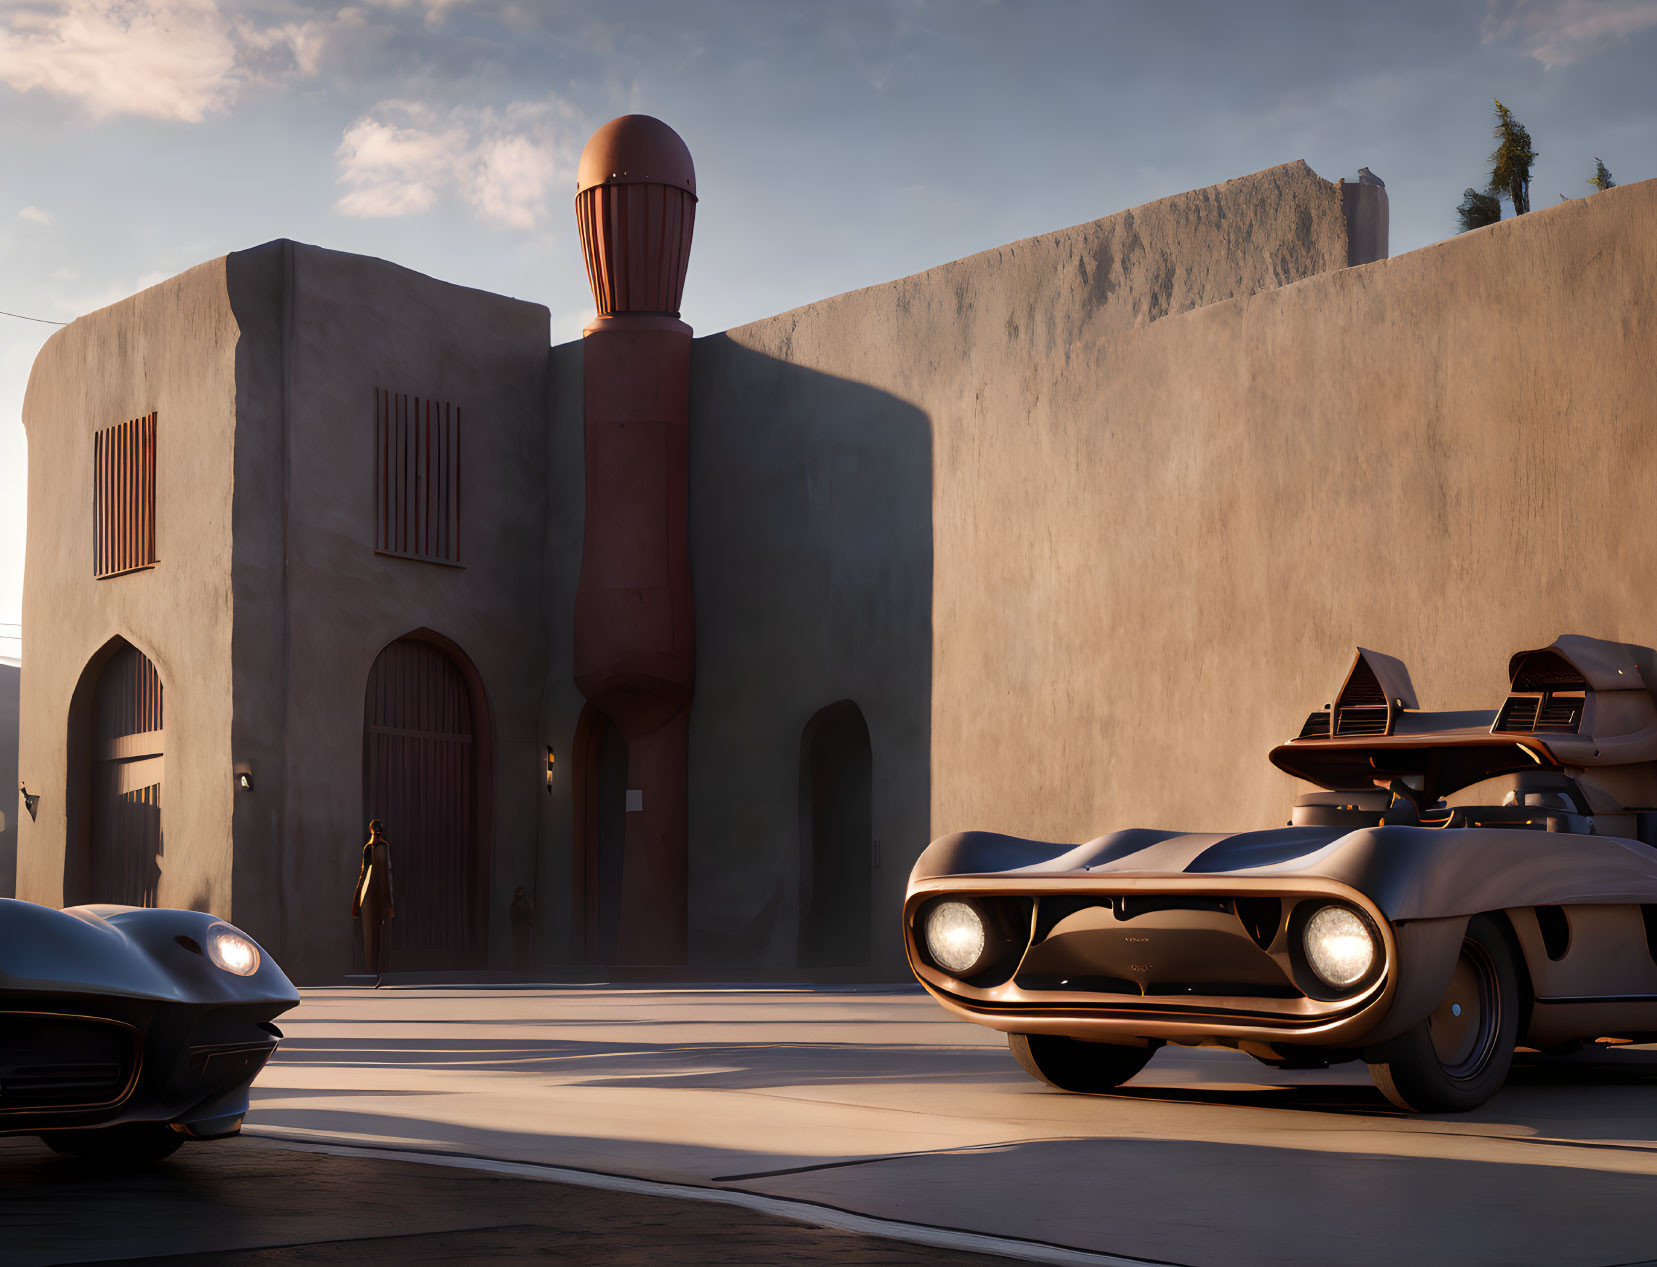 Futuristic cars parked at modern desert house with cylindrical structure at sunset